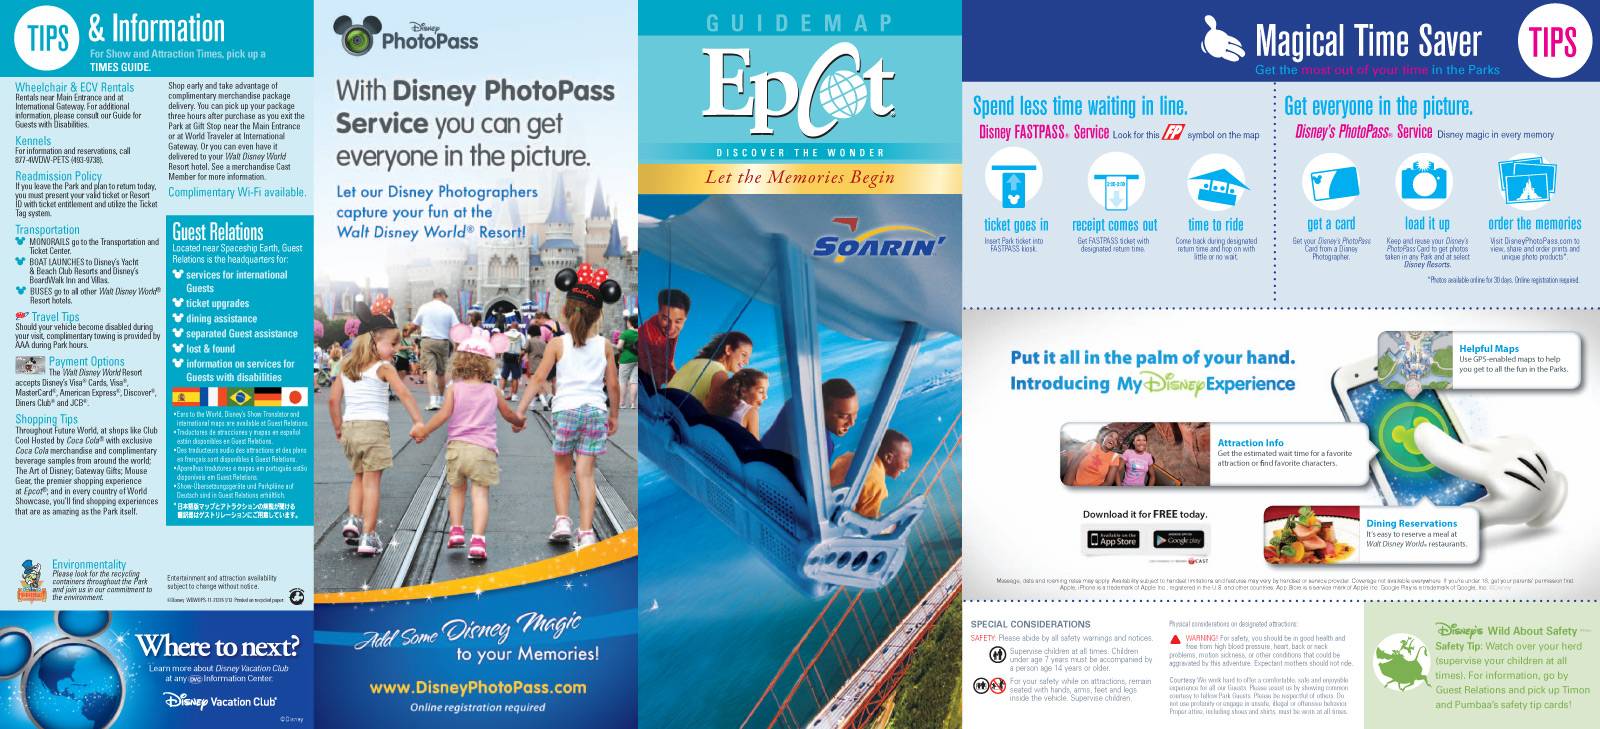 New park maps released today include 'My Disney Experience' details and no more Kodak